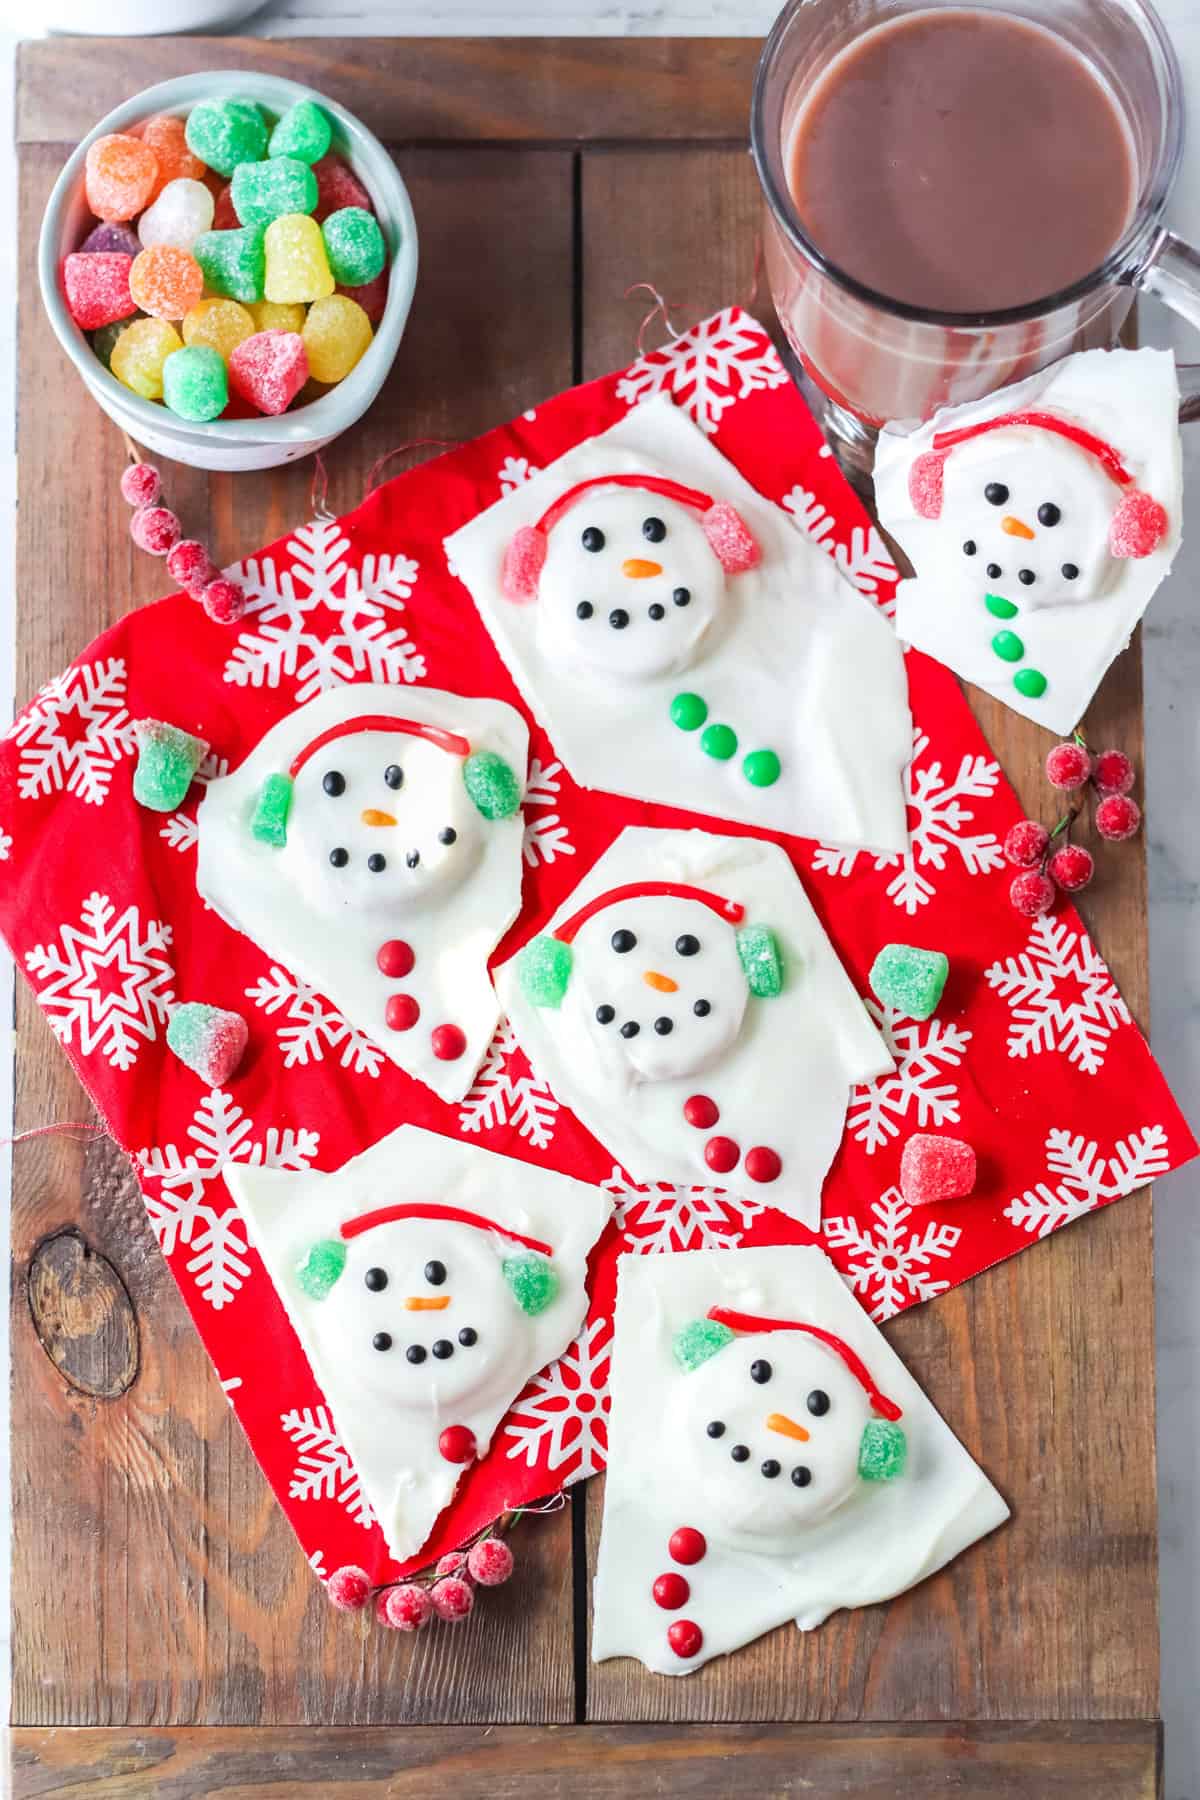 Individual pieces of finished melted snowman chocolate bark on serving tray with bowl of gumdrop candies and a glass of hot cocoa.